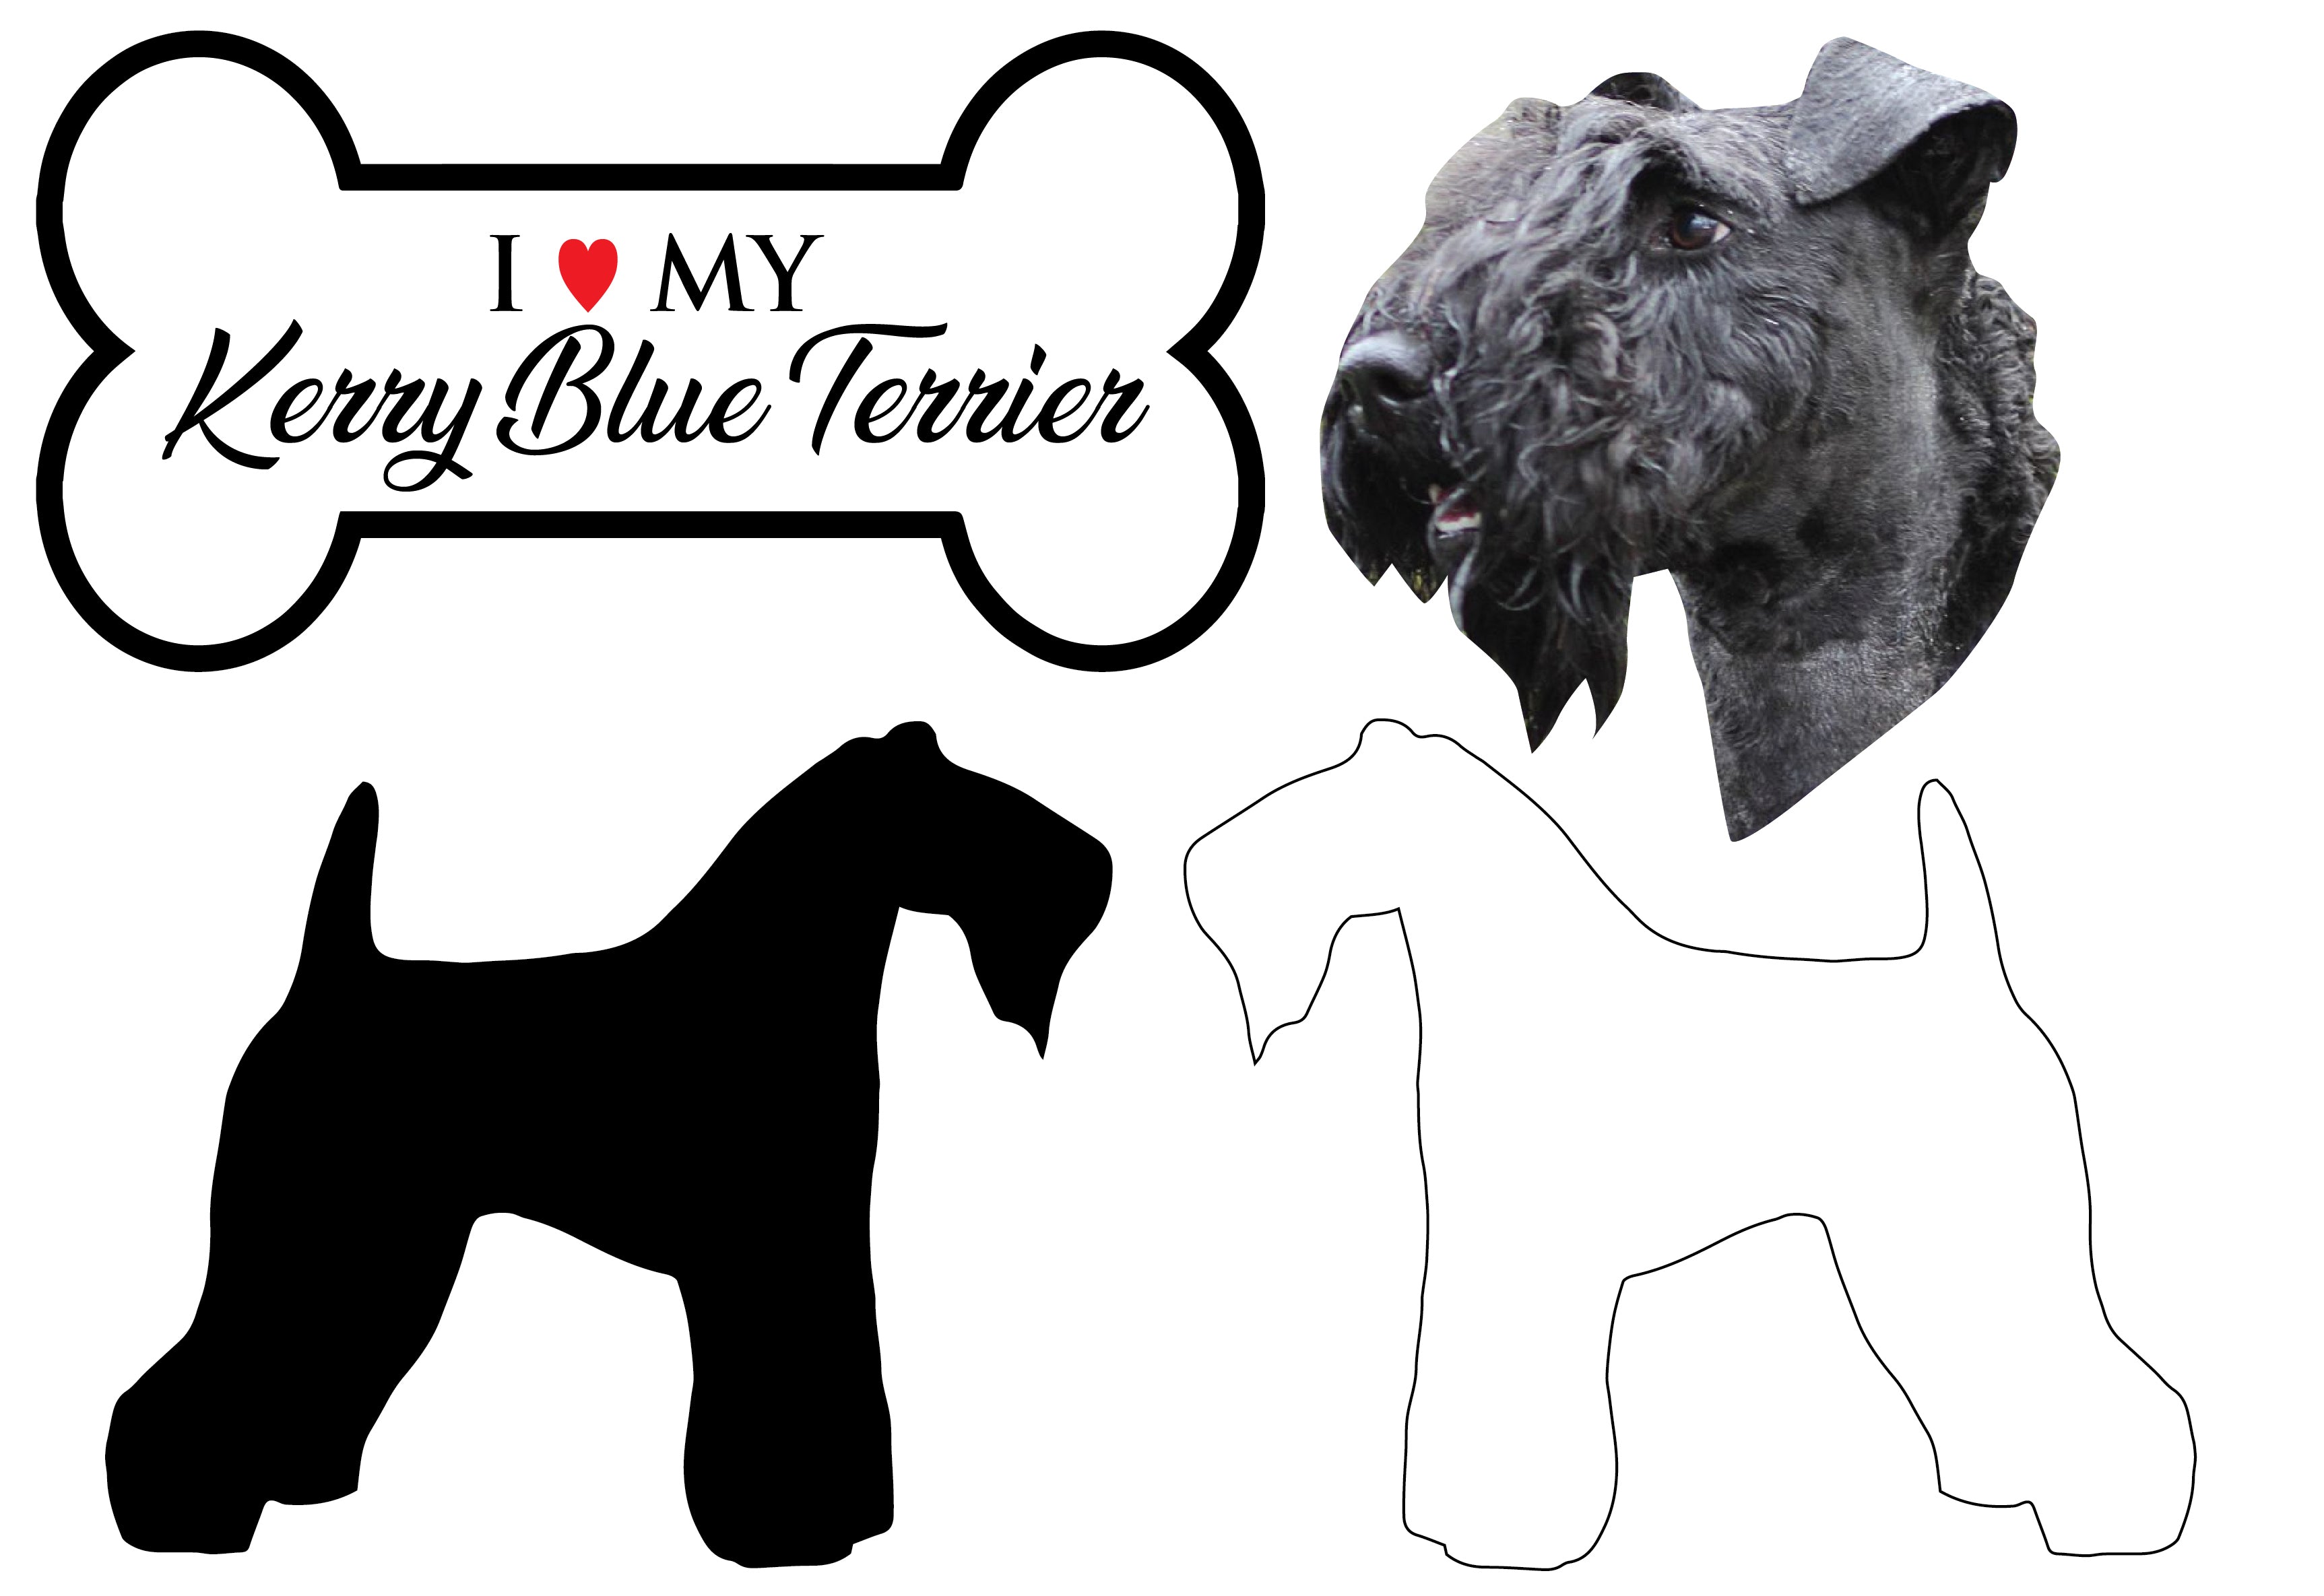 Kerry Blue Terrier - Dog Breed Decals (Set of 16) - Sizes in Description